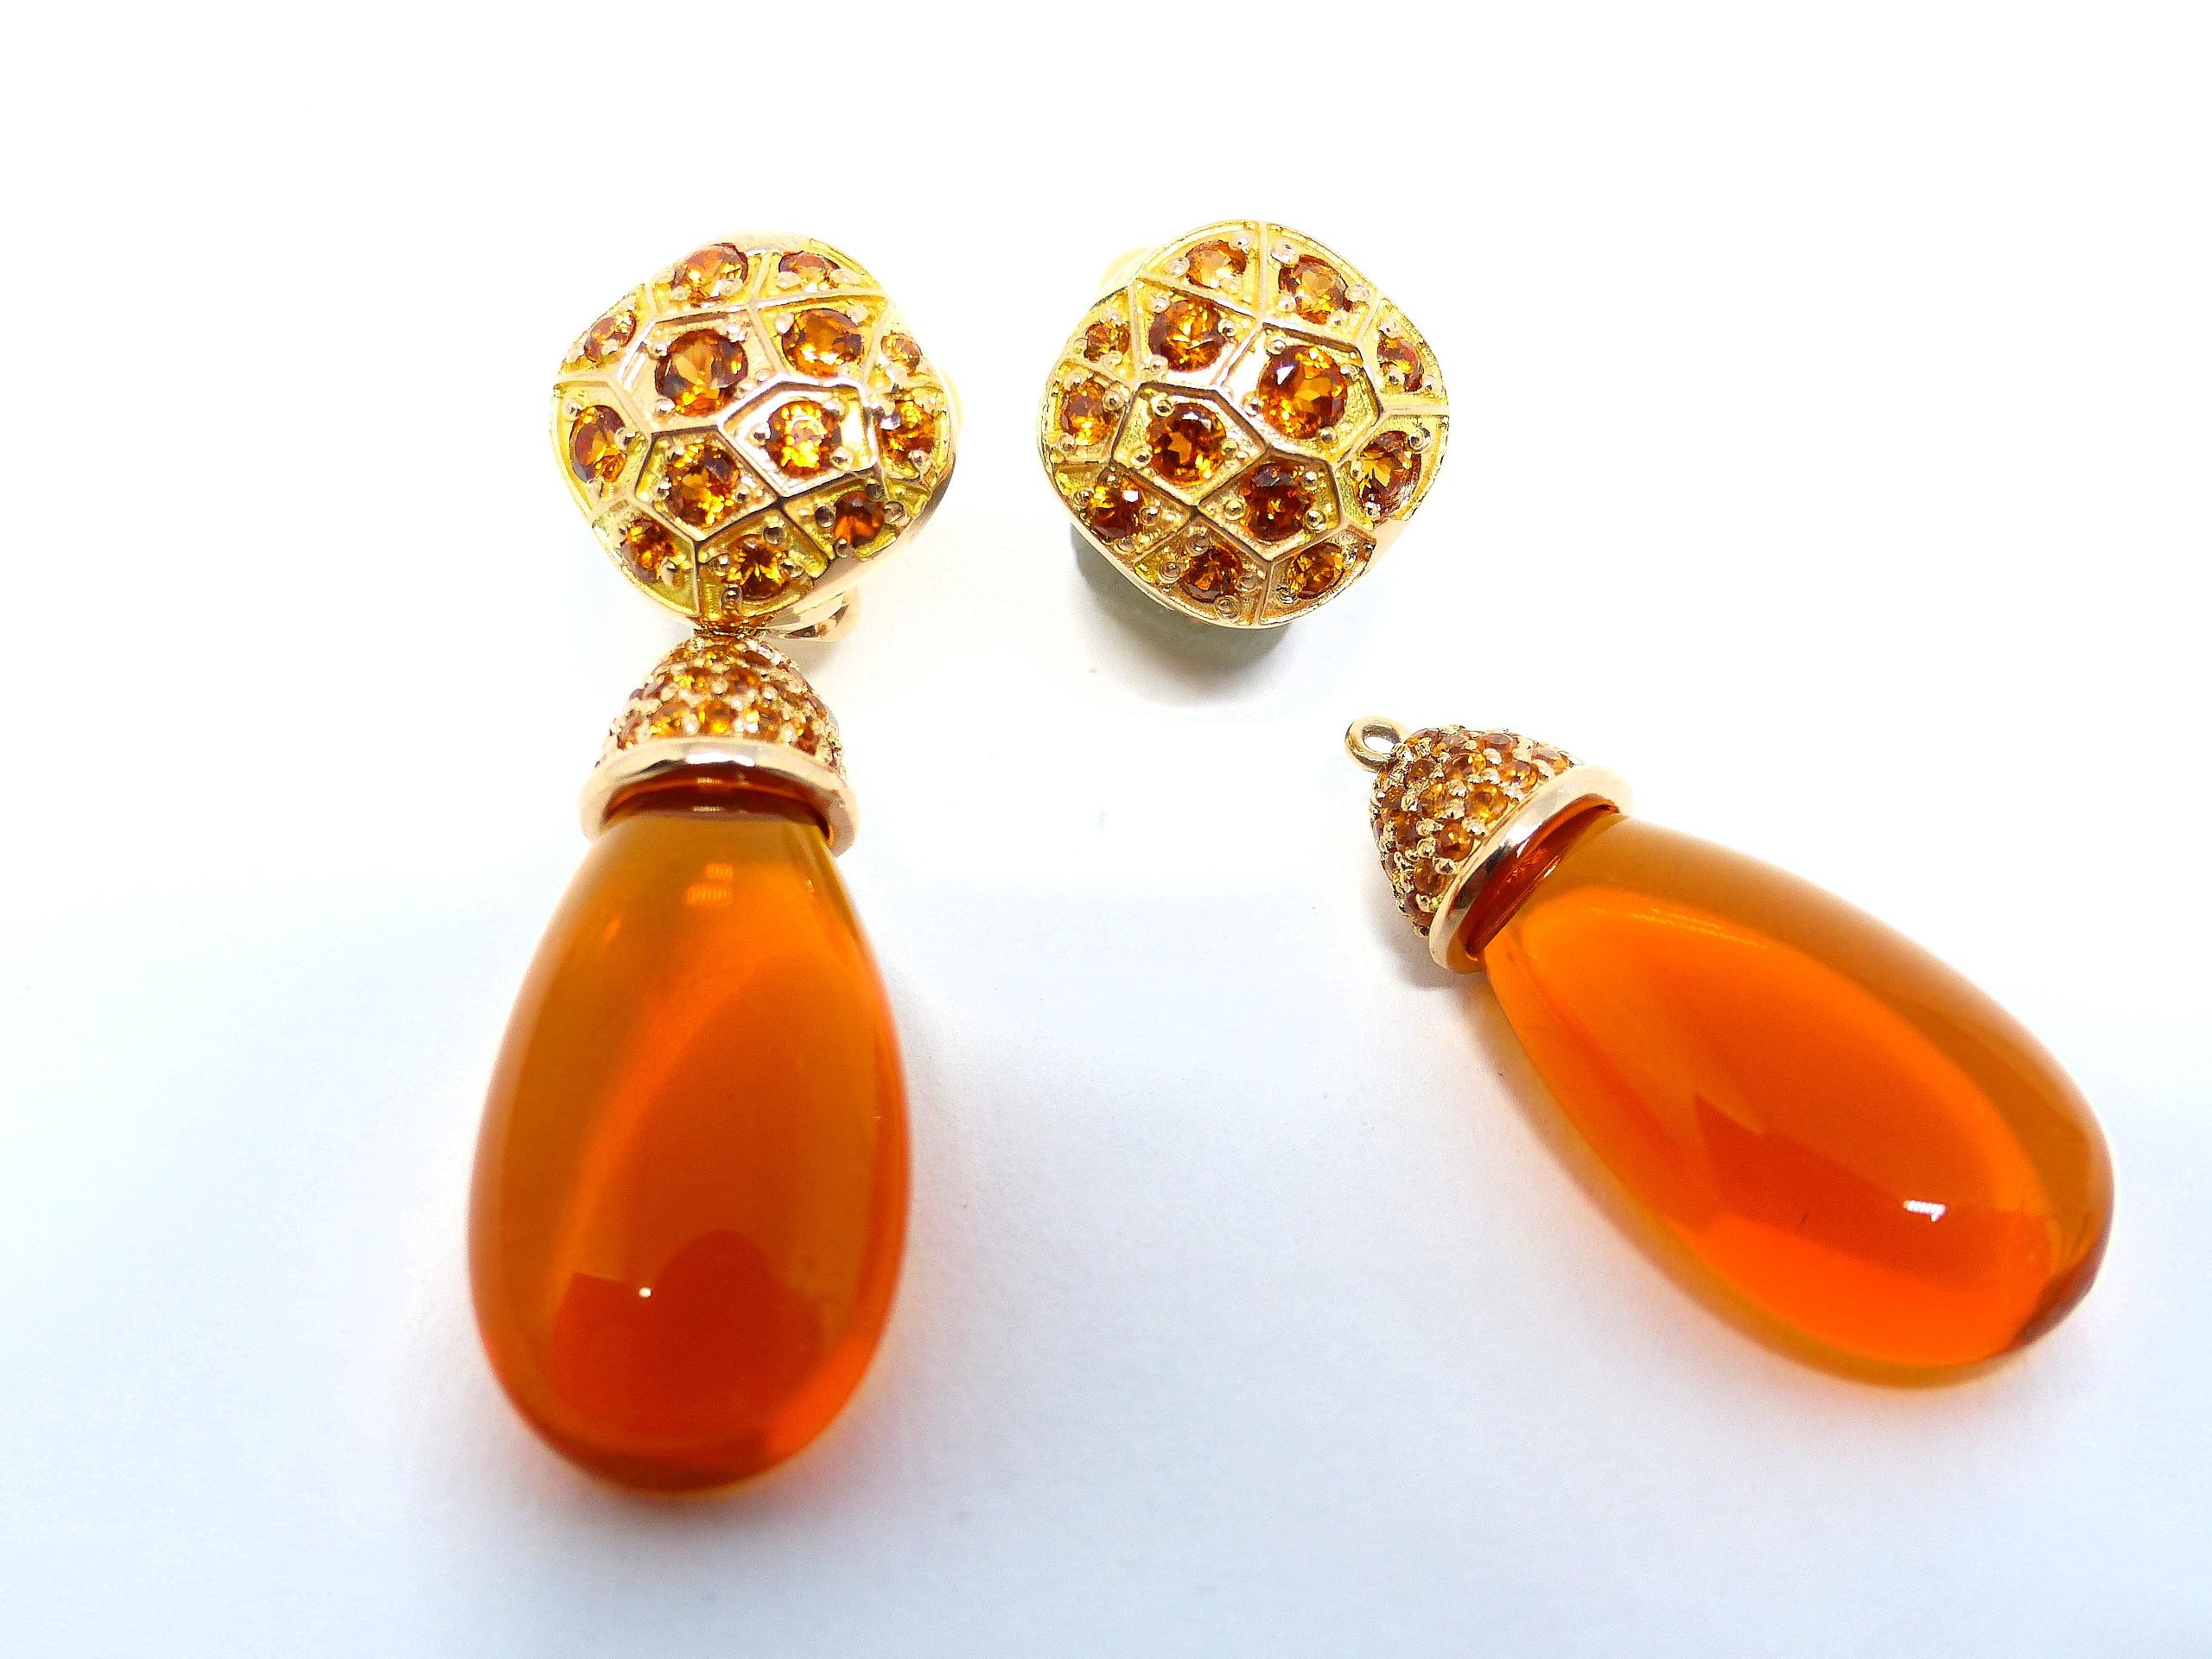 Contemporary Earrings in Red Gold with 2 Fire Opal Brioletts and Mandarine Garnets. For Sale